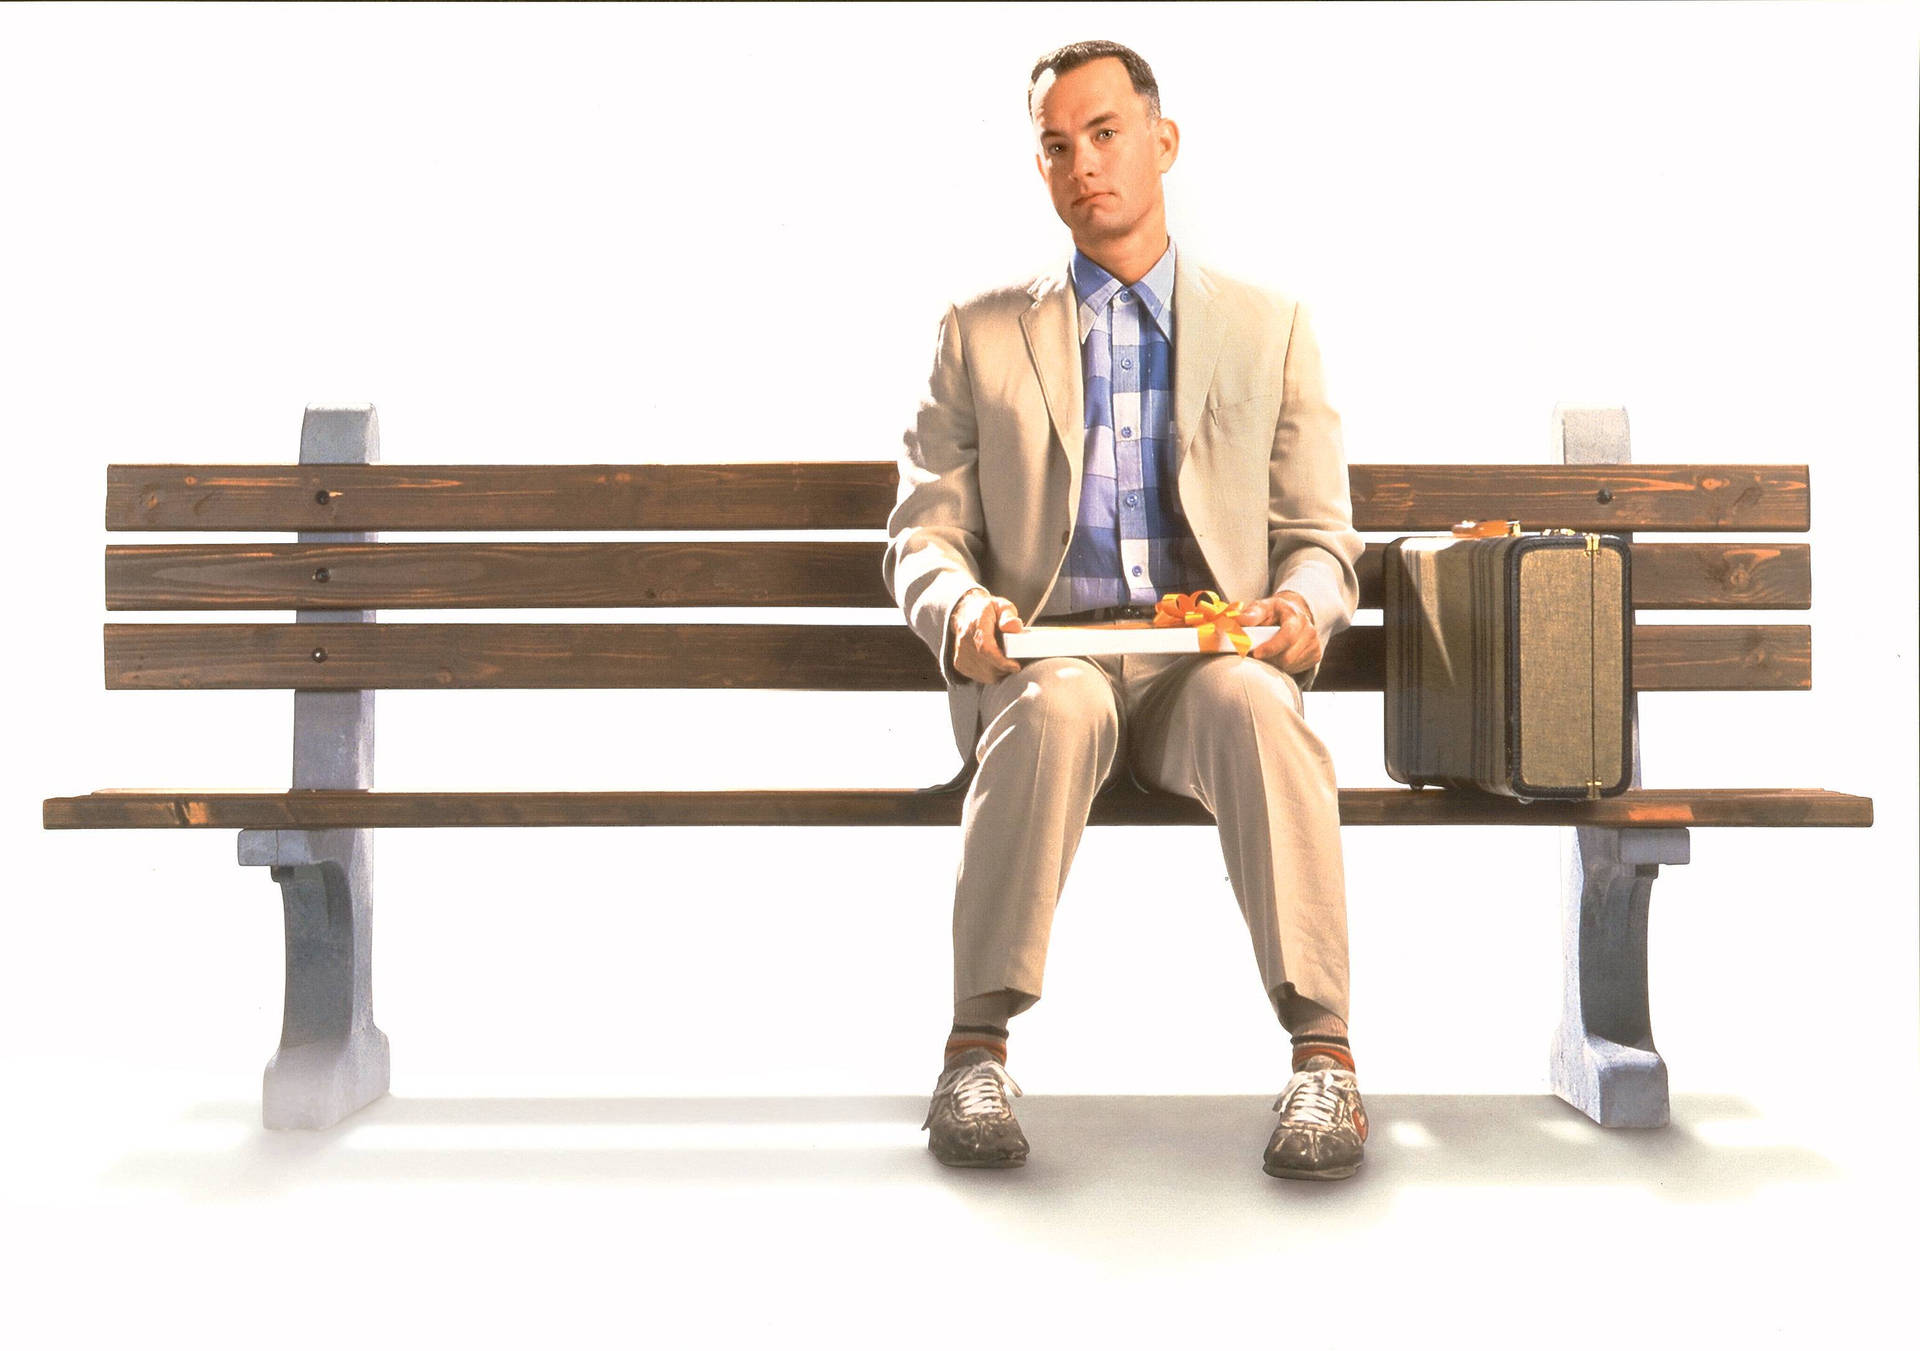 Forrest Gump Bench With Suitcase Background